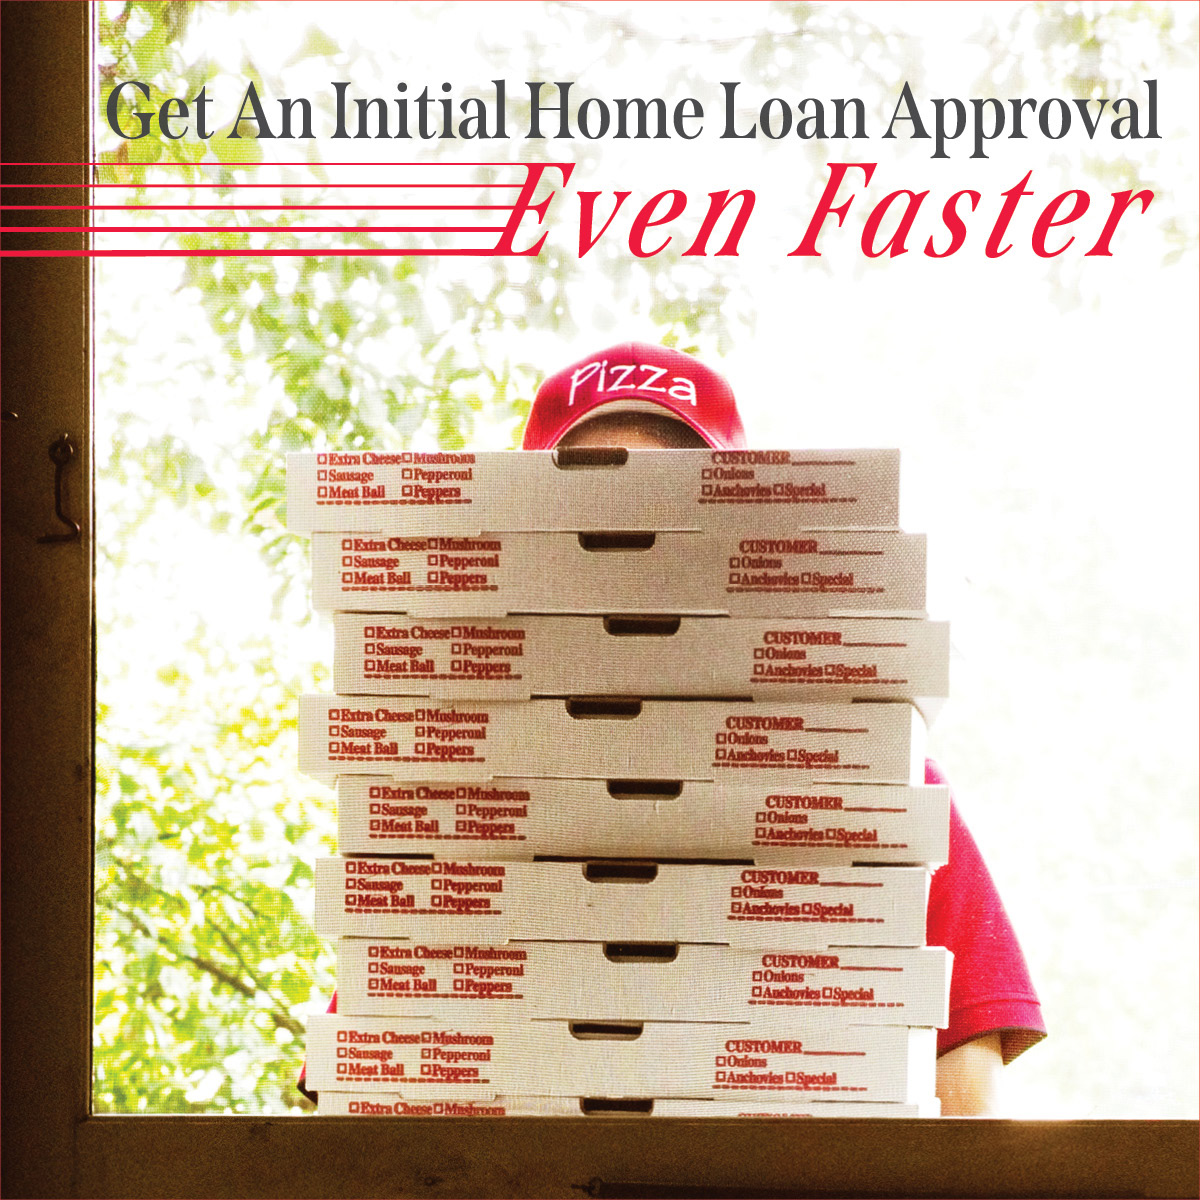 I can get you an initial mortgage approval faster than you can get a pizza delivered — in as little as 15 minutes! Call me today to learn more.
#newpurchase#homeloans#greatrates#fastclose#greatservice